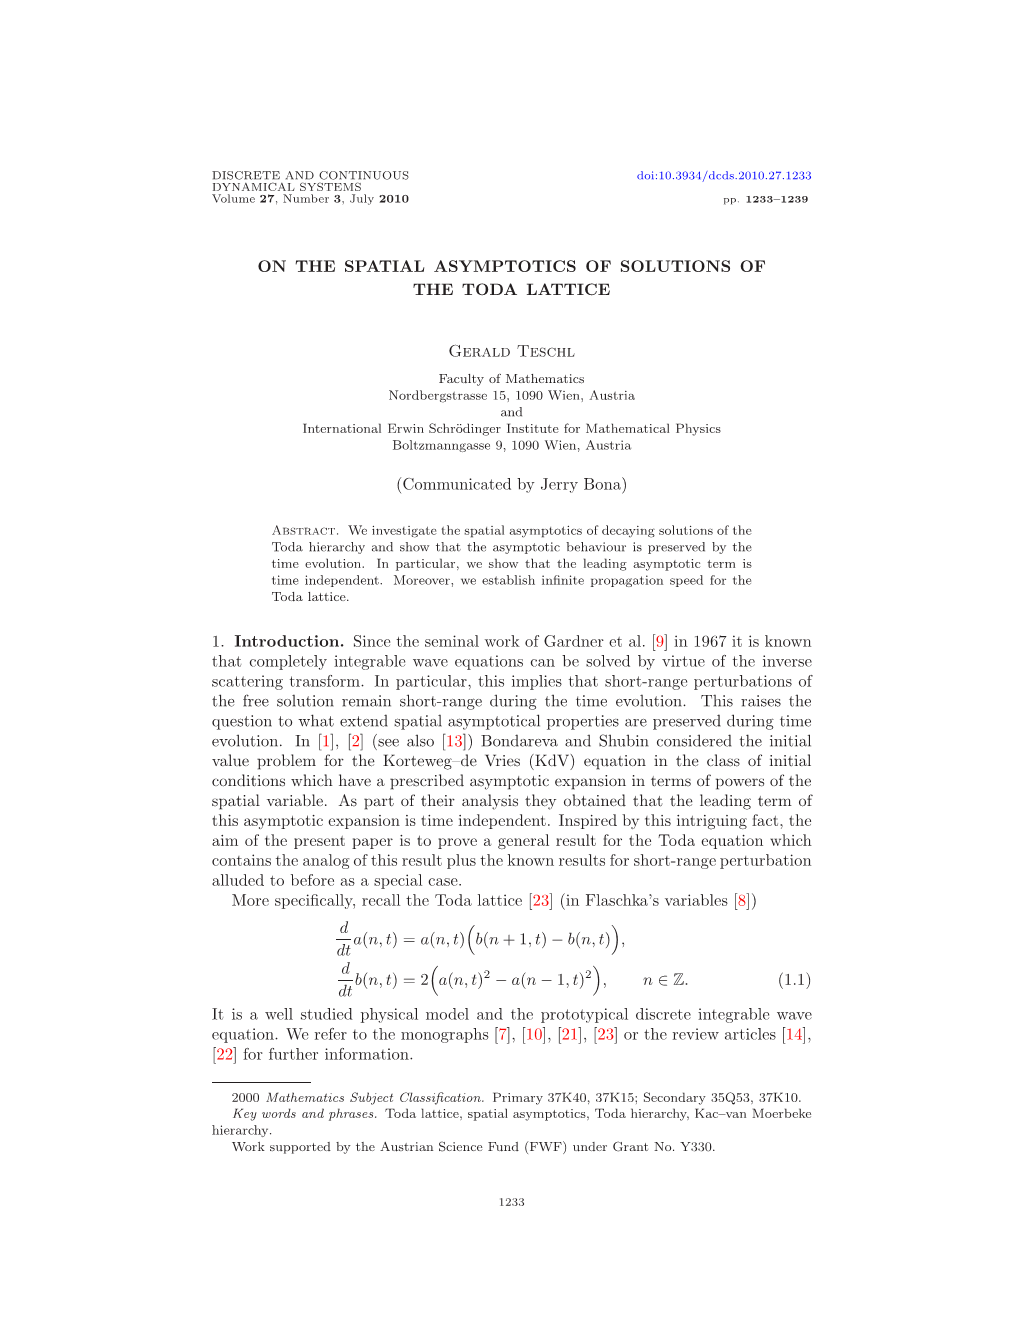 On the Spatial Asymptotics of Solutions of the Toda Lattice